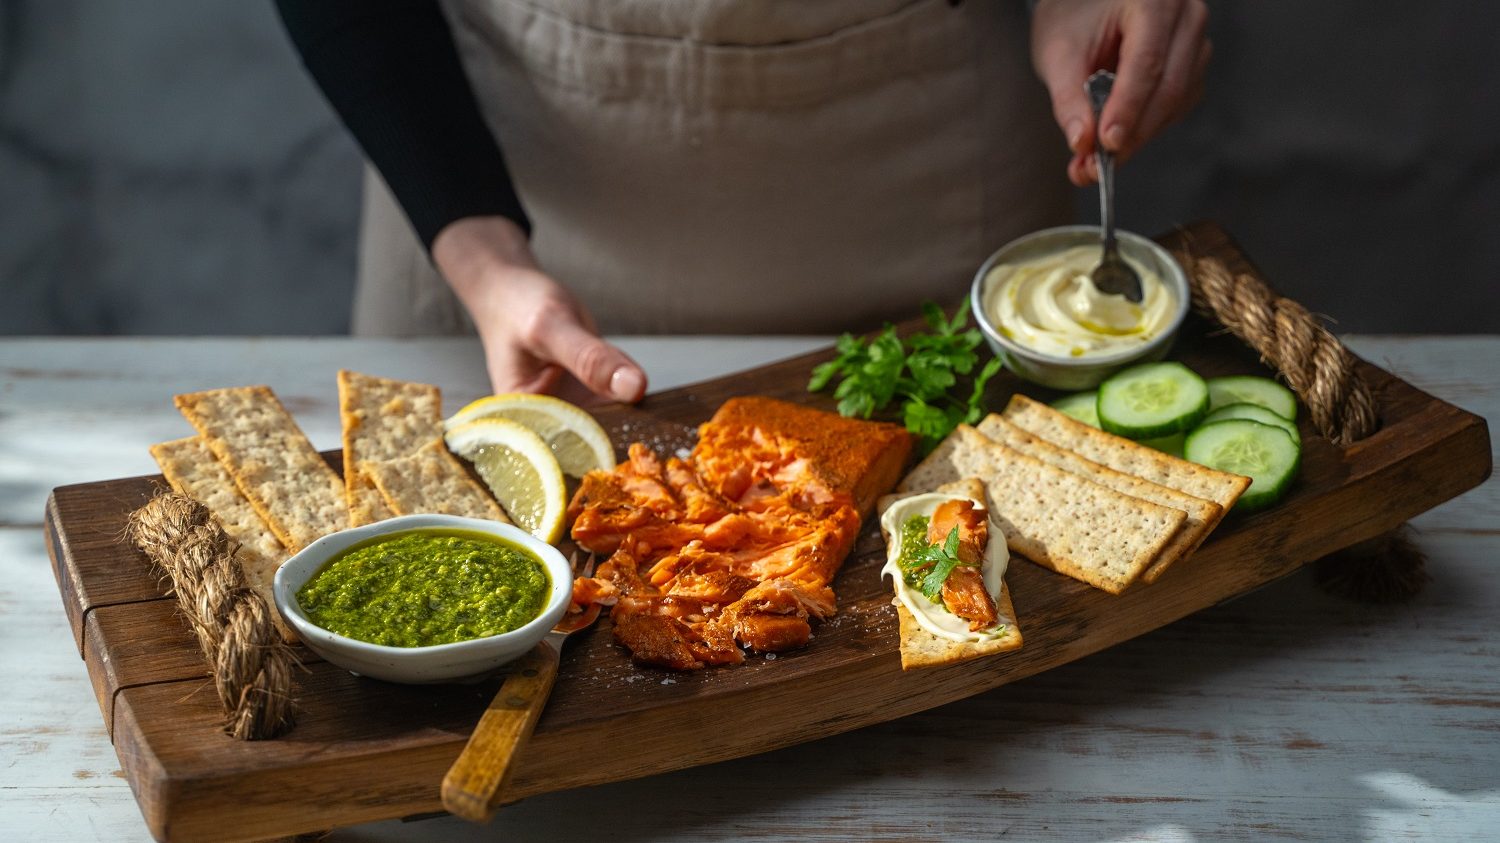 A person serving a wooden tray of salmon, crackers, pots of sauces and cucumber slices on it.